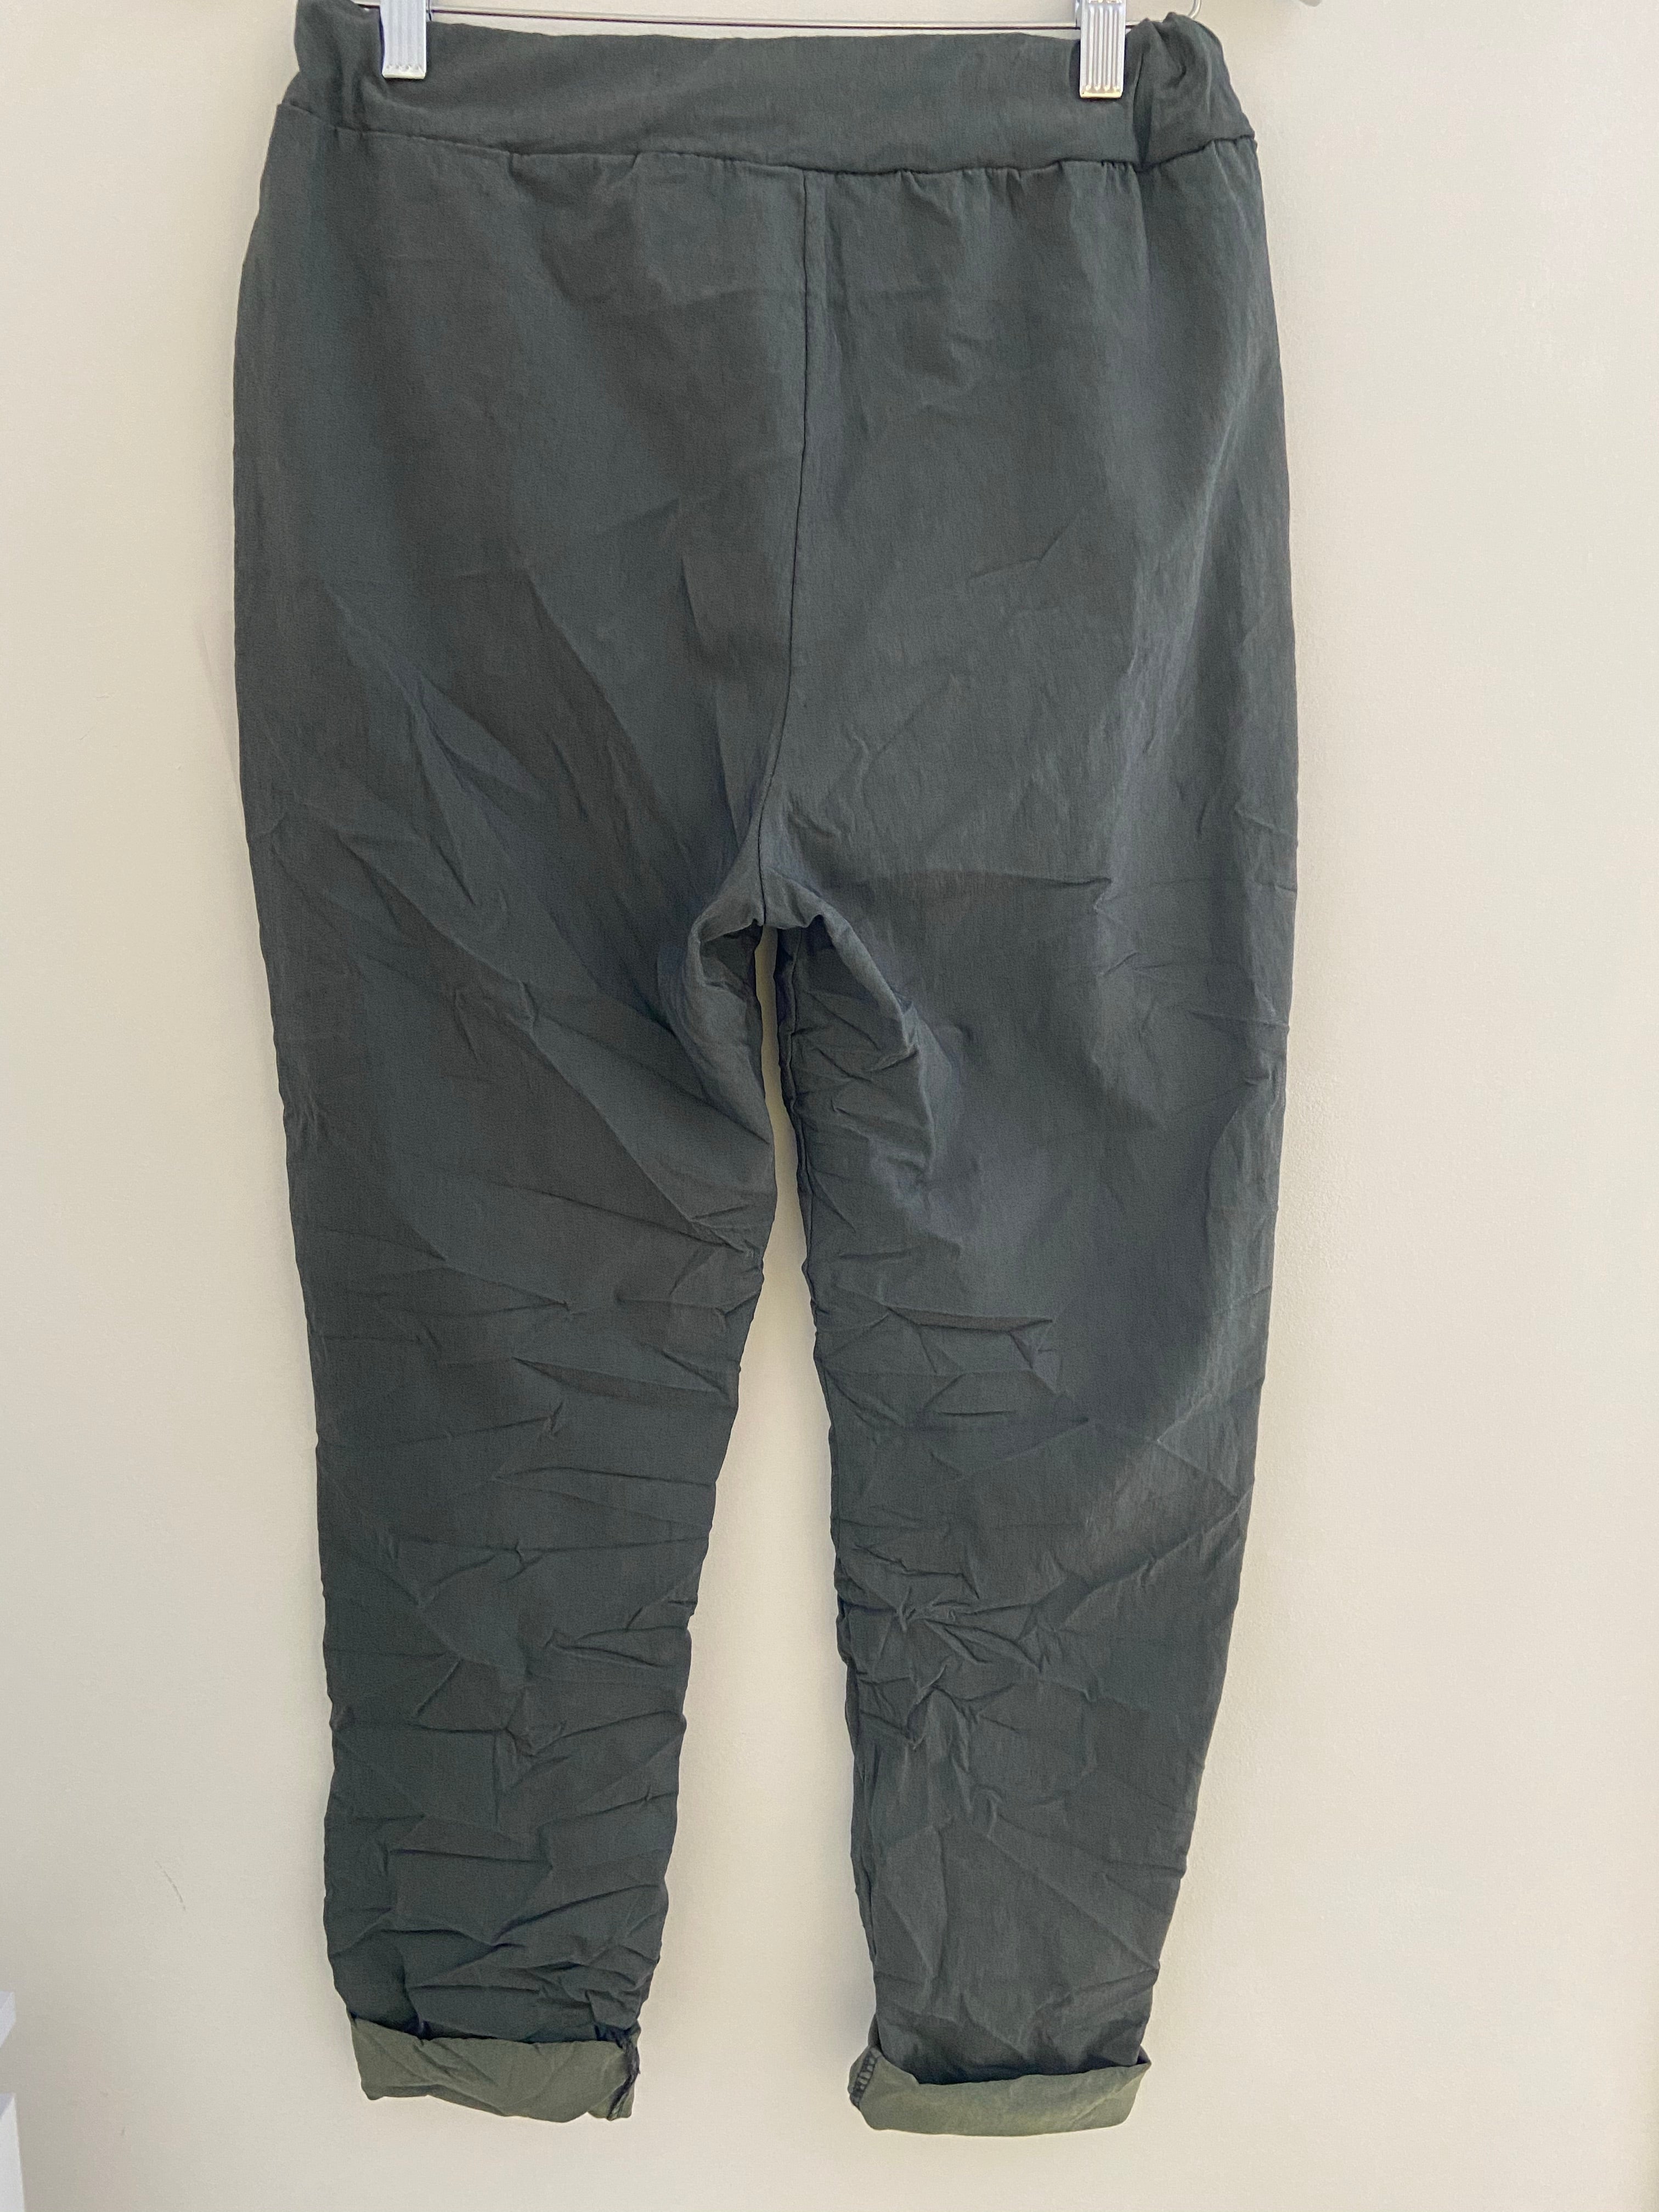 Super Stretch Joggers in Charcoal